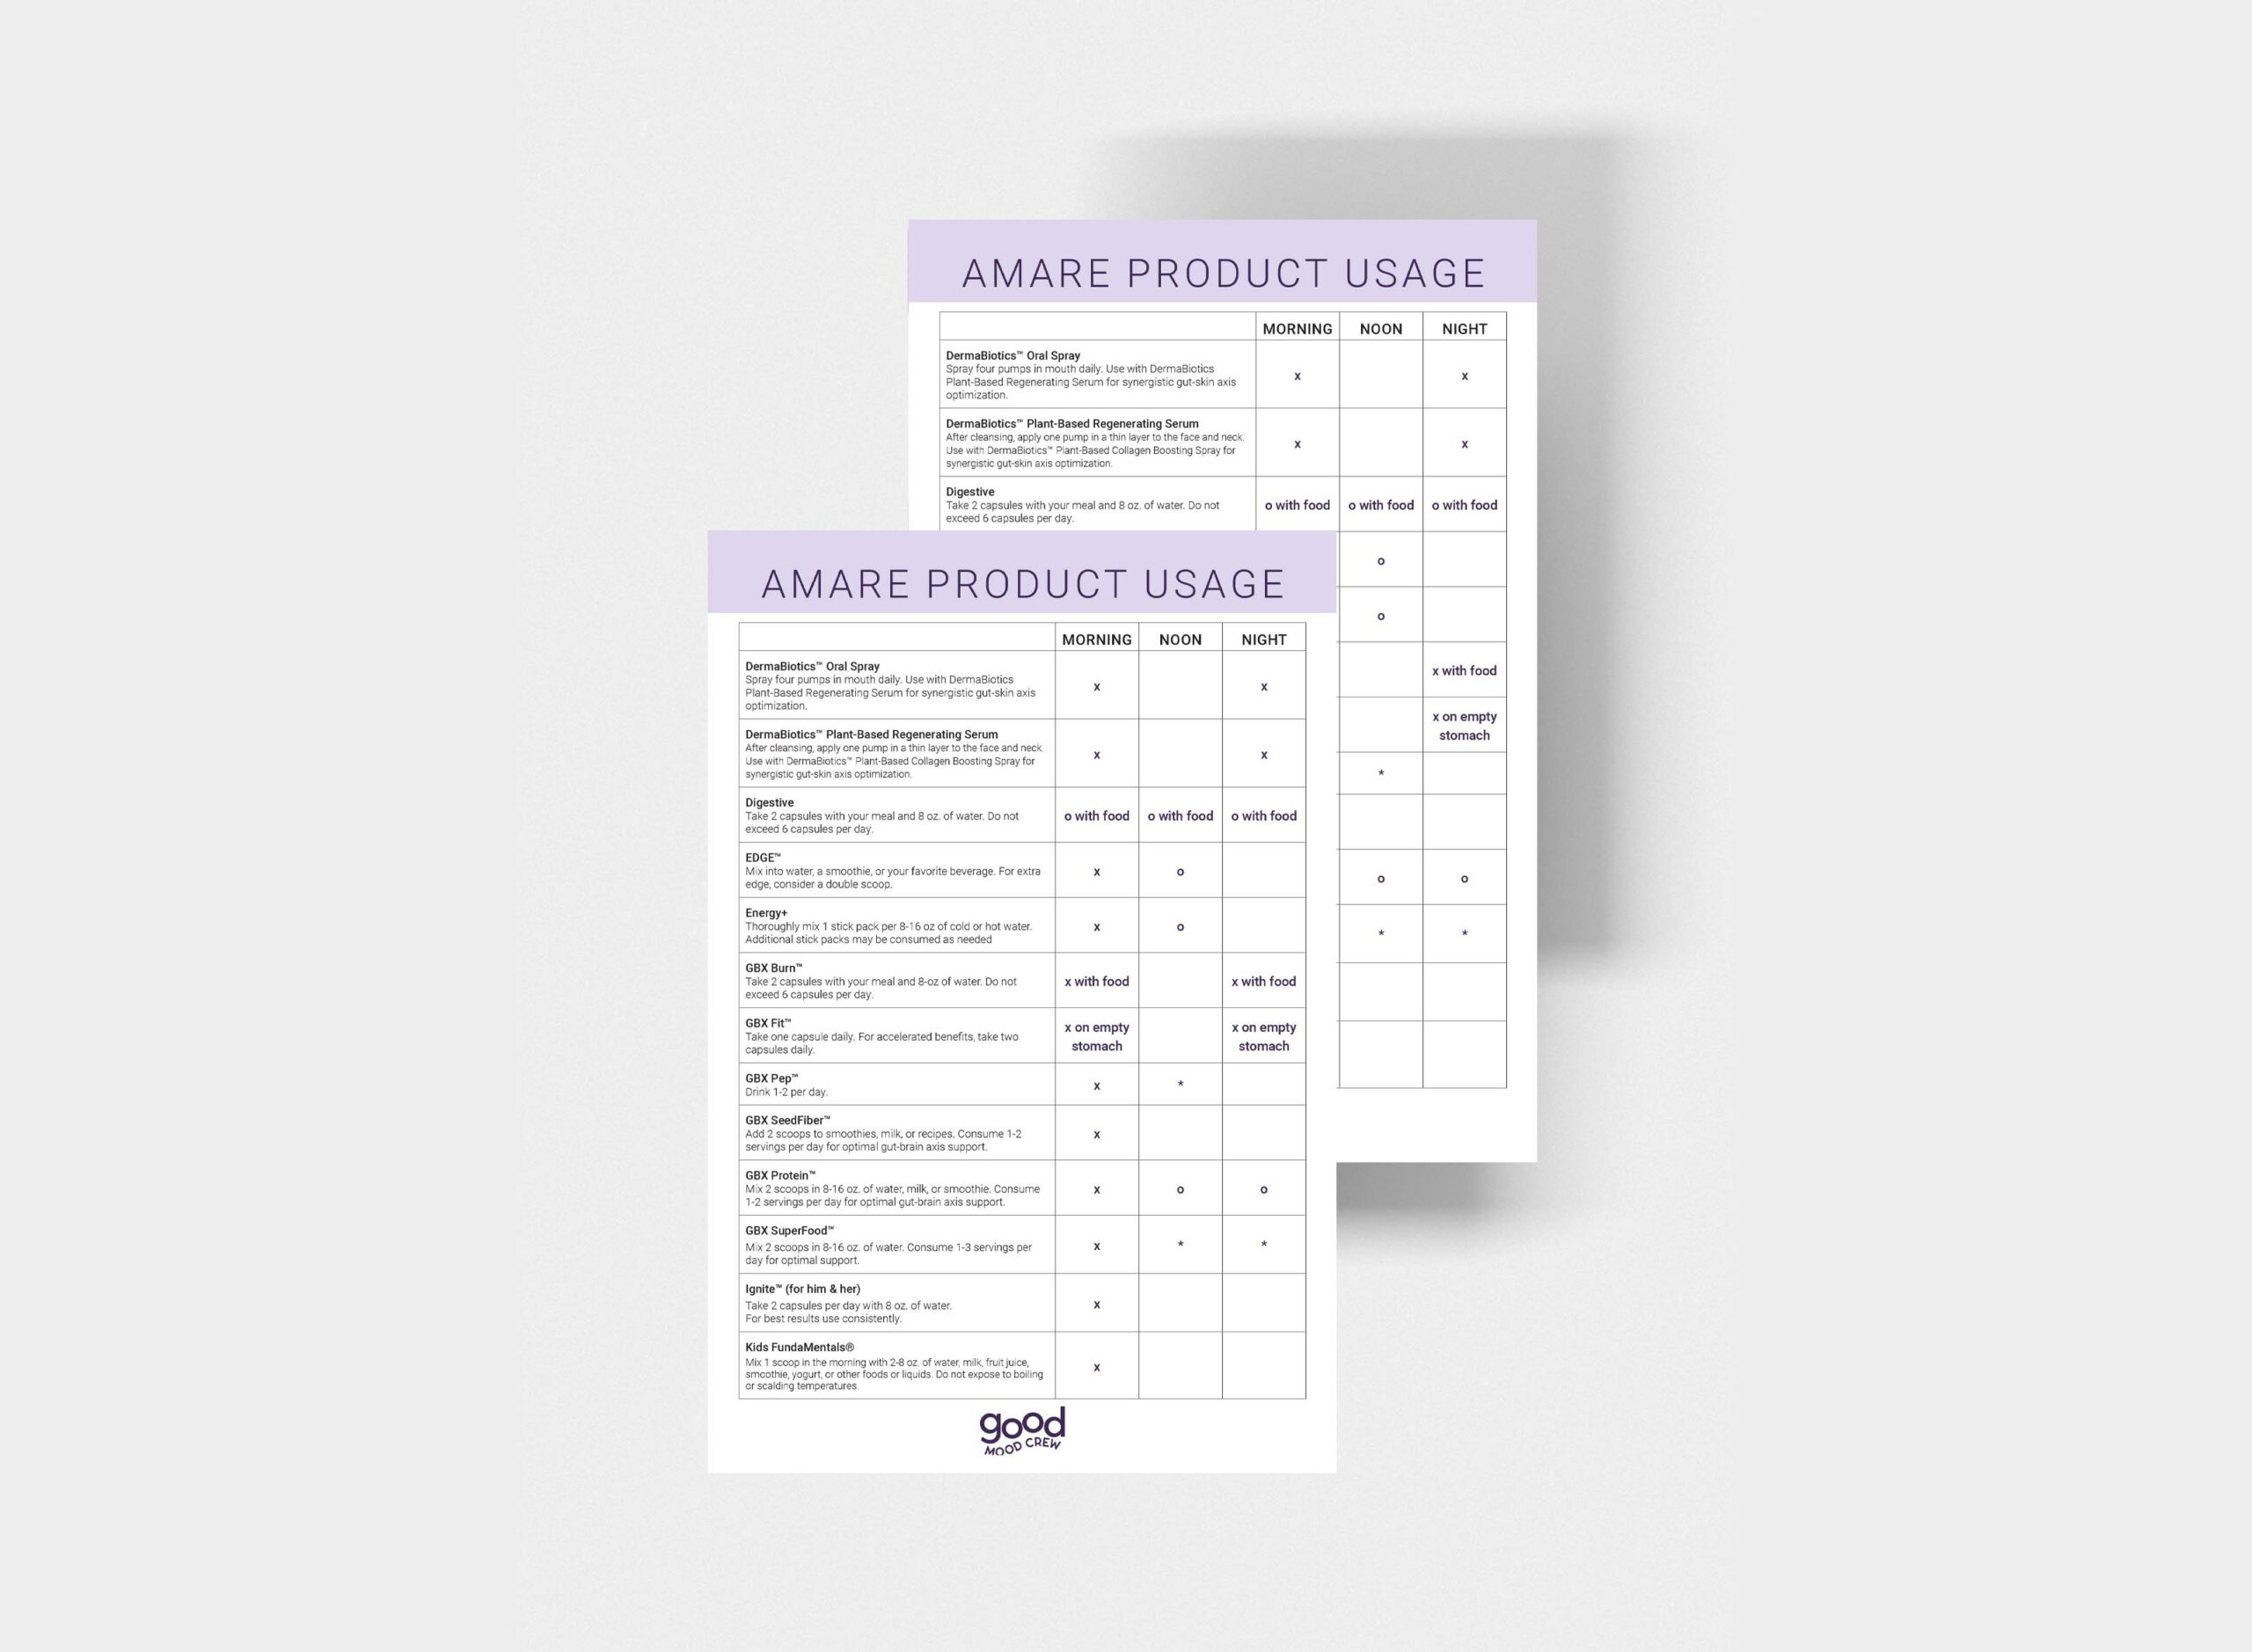 Amare Product Usage Guide